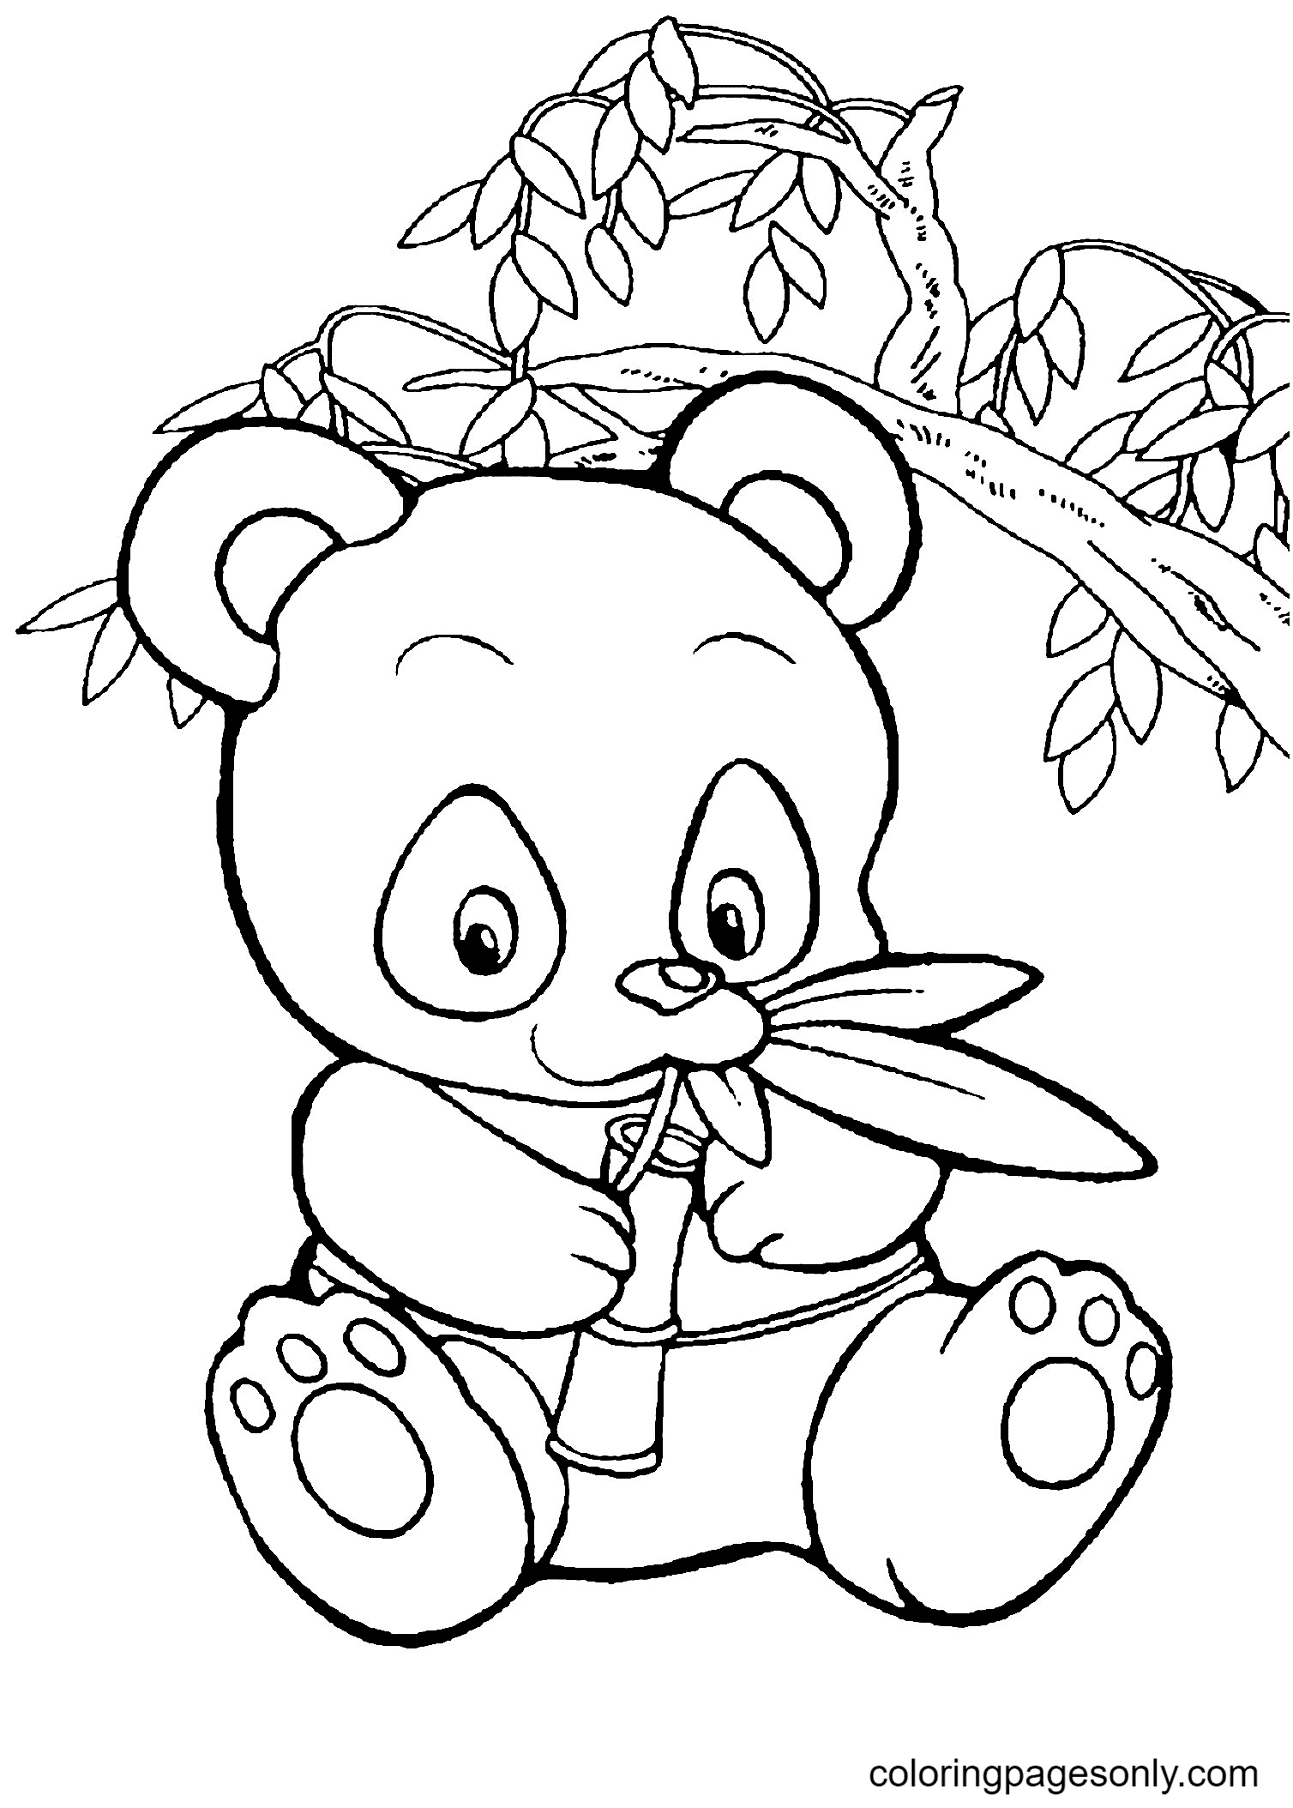 Baby Panda is Eating Bamboo Coloring Page